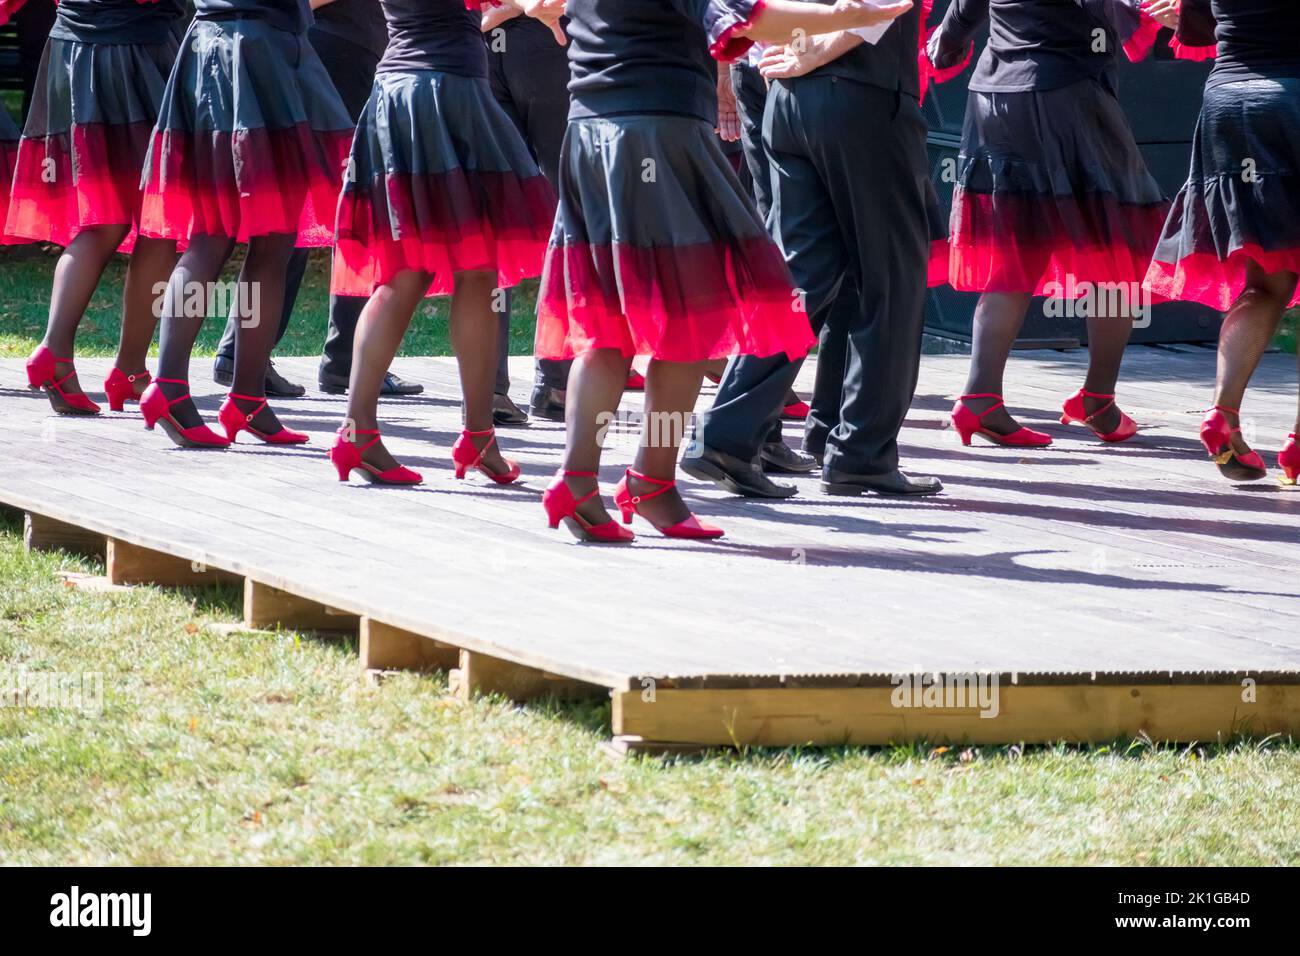 The dance team dances on the light brown stage with pink shoes and black and pink skirts Stock Photo